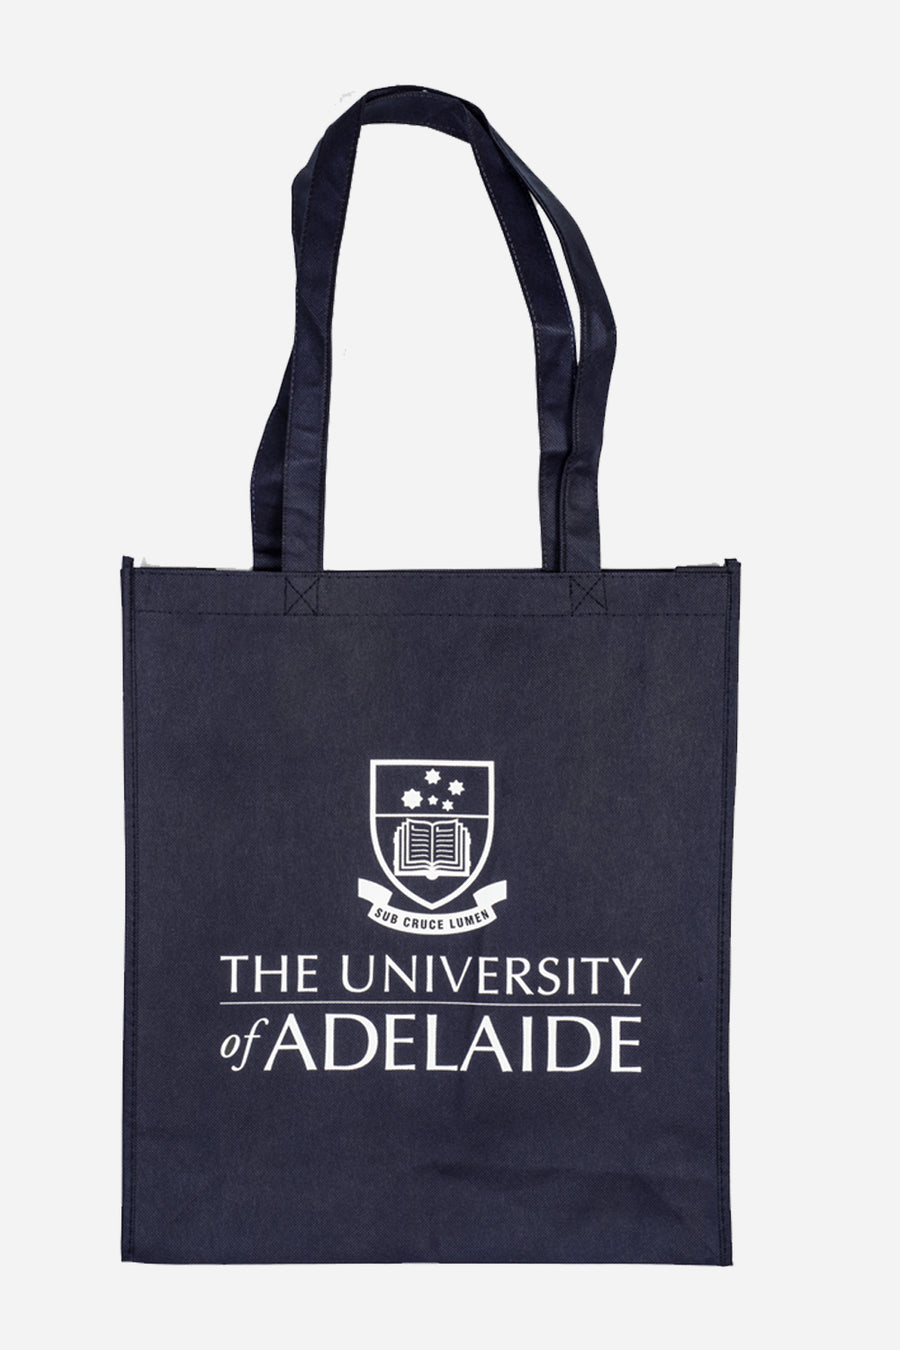 University Cloth Bag - The Adelaide Store